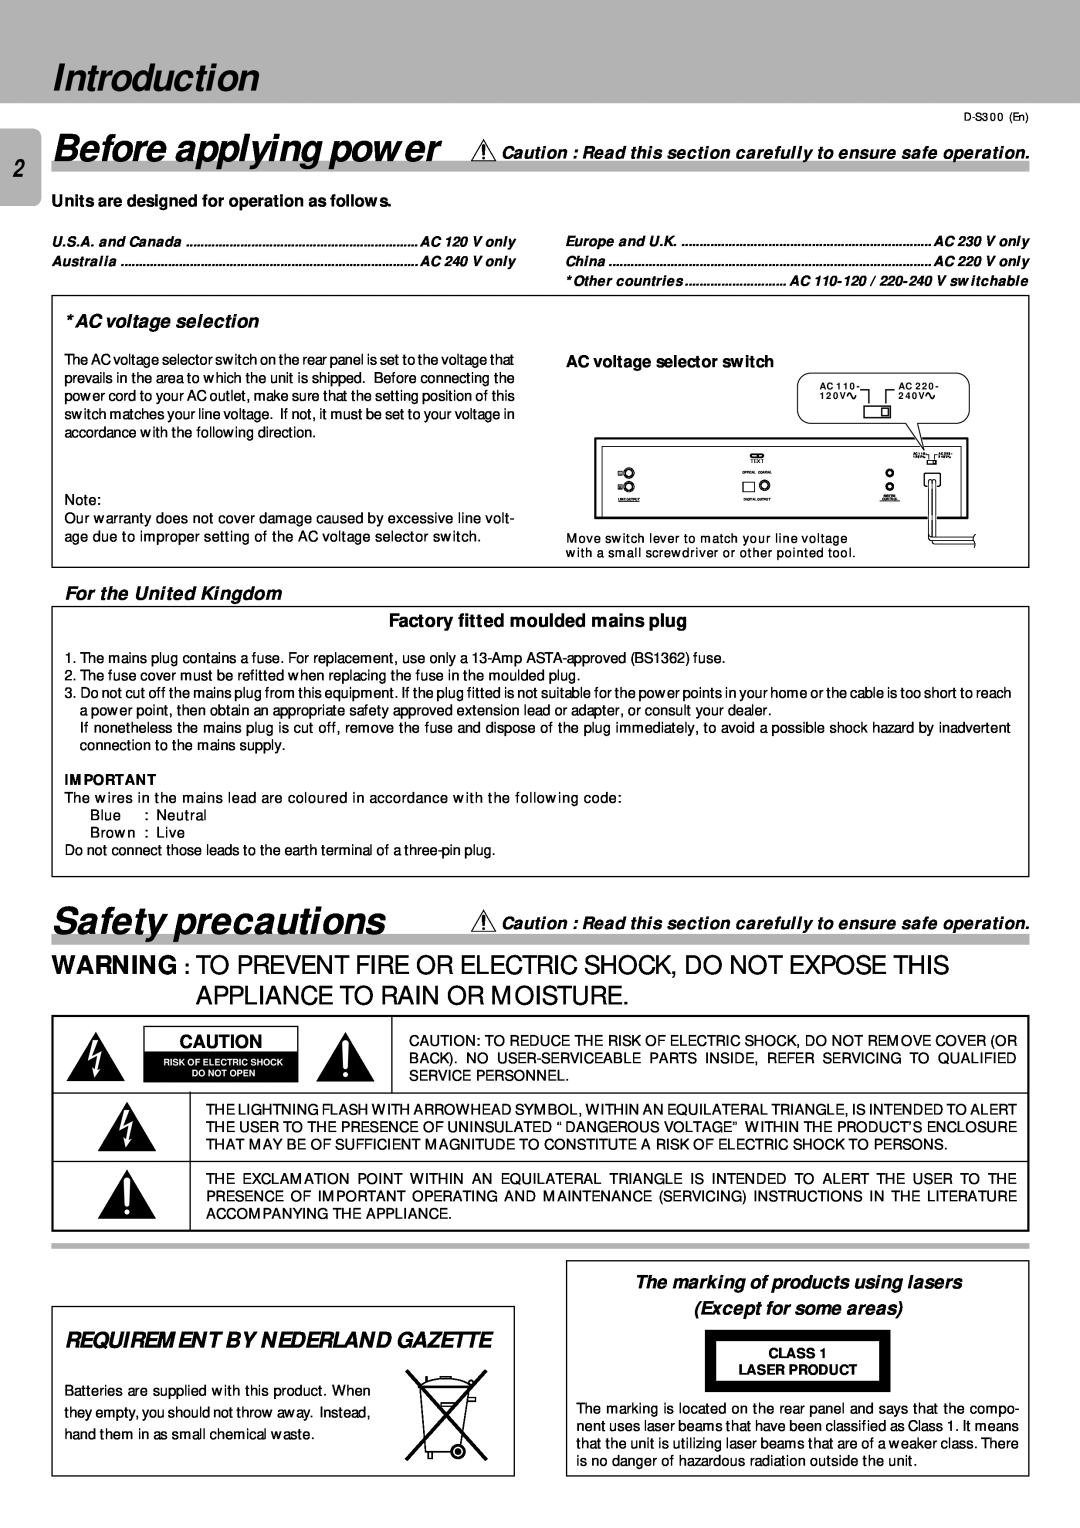 Kenwood D-S300 instruction manual Introduction, Safety precautions, Requirement By Nederland Gazette, AC voltage selection 